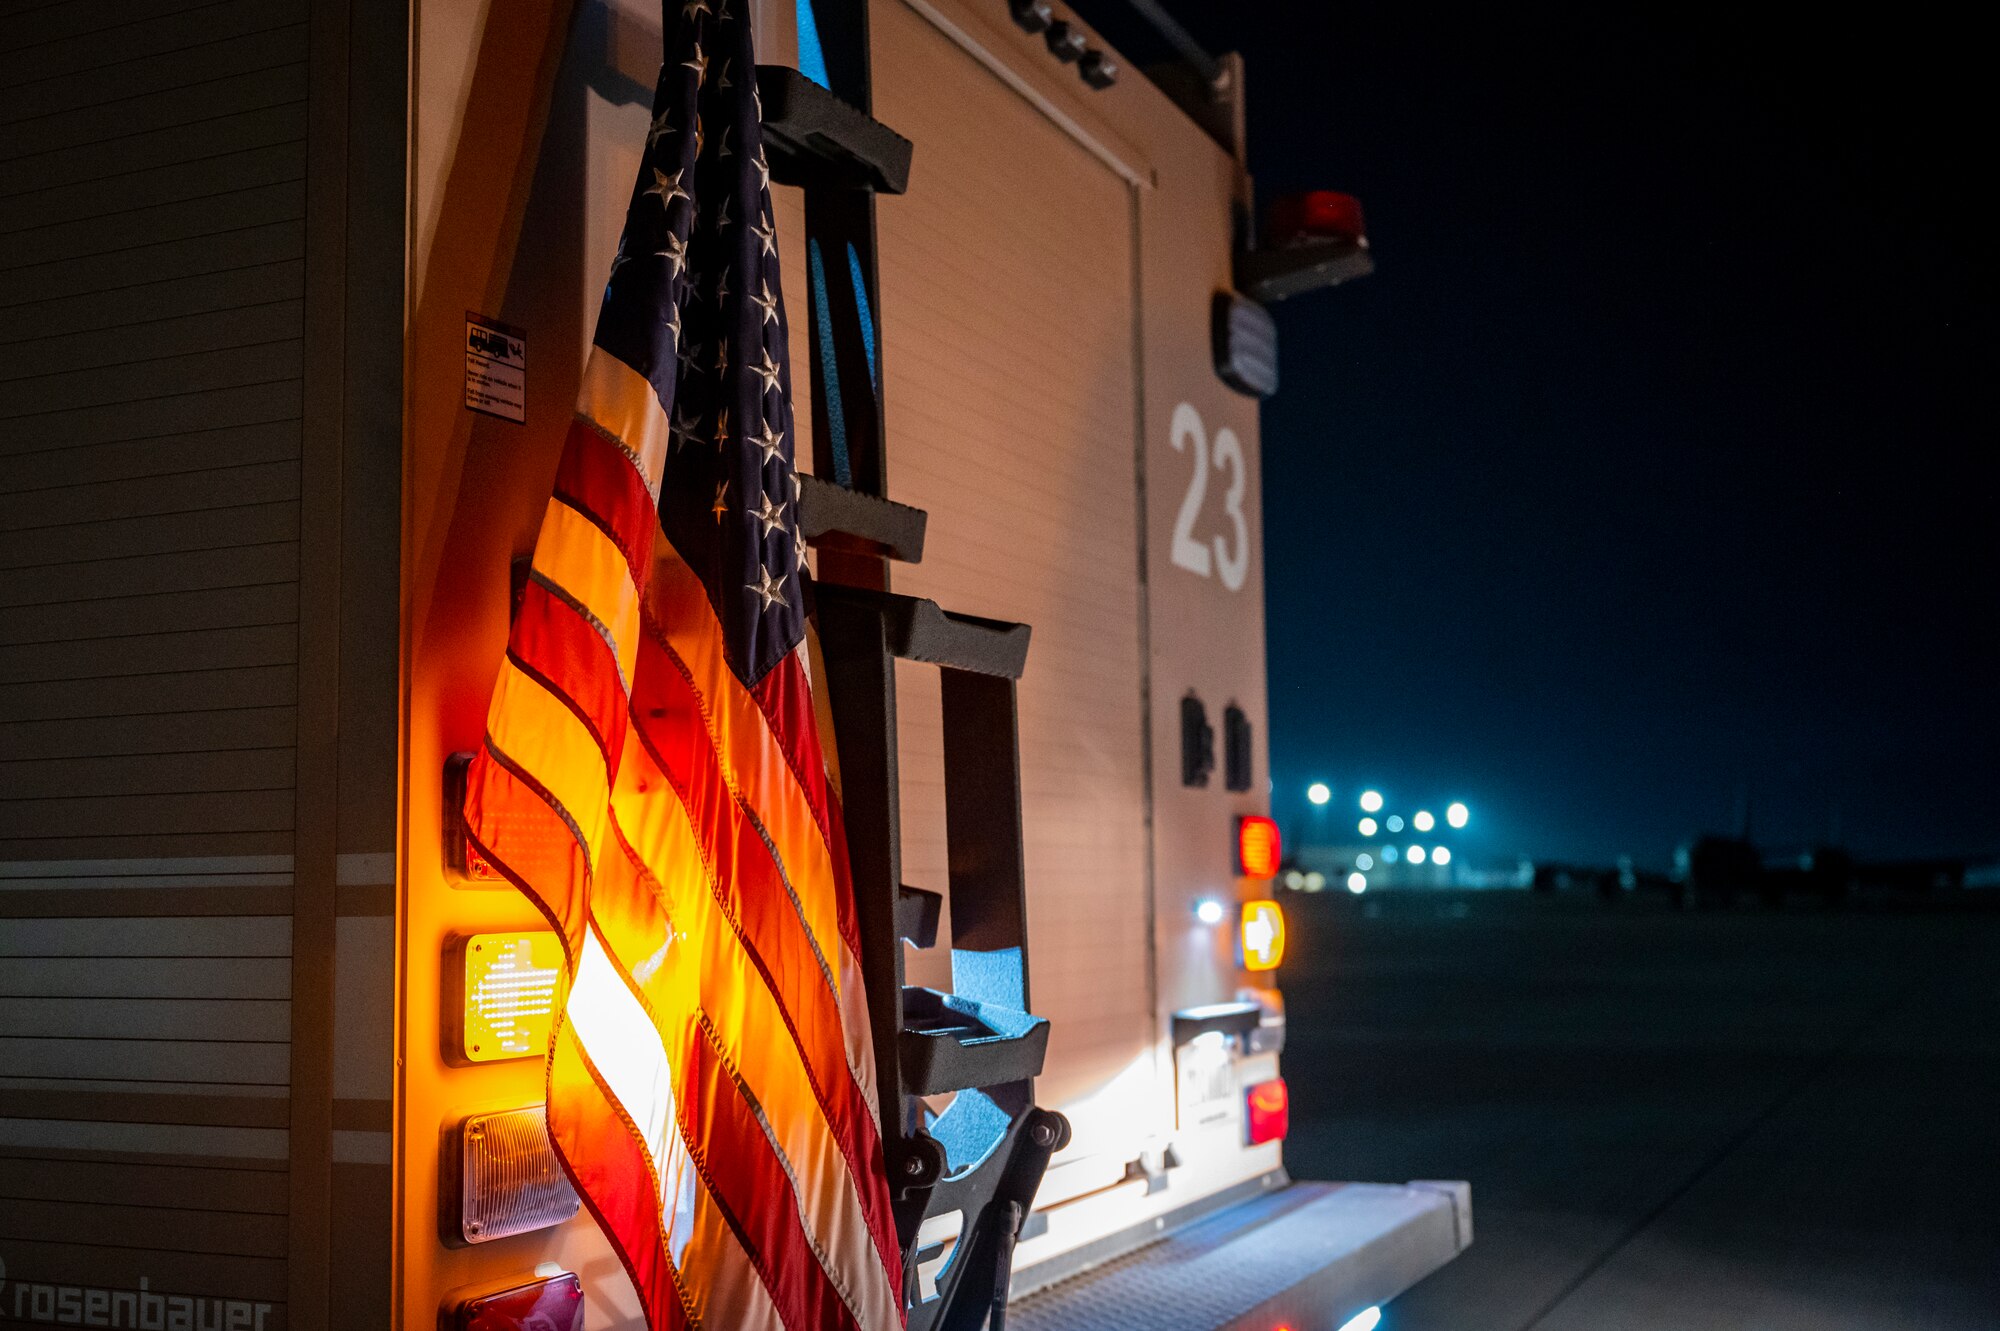 An American flag is draped on the back of a firetruck on the flight line.